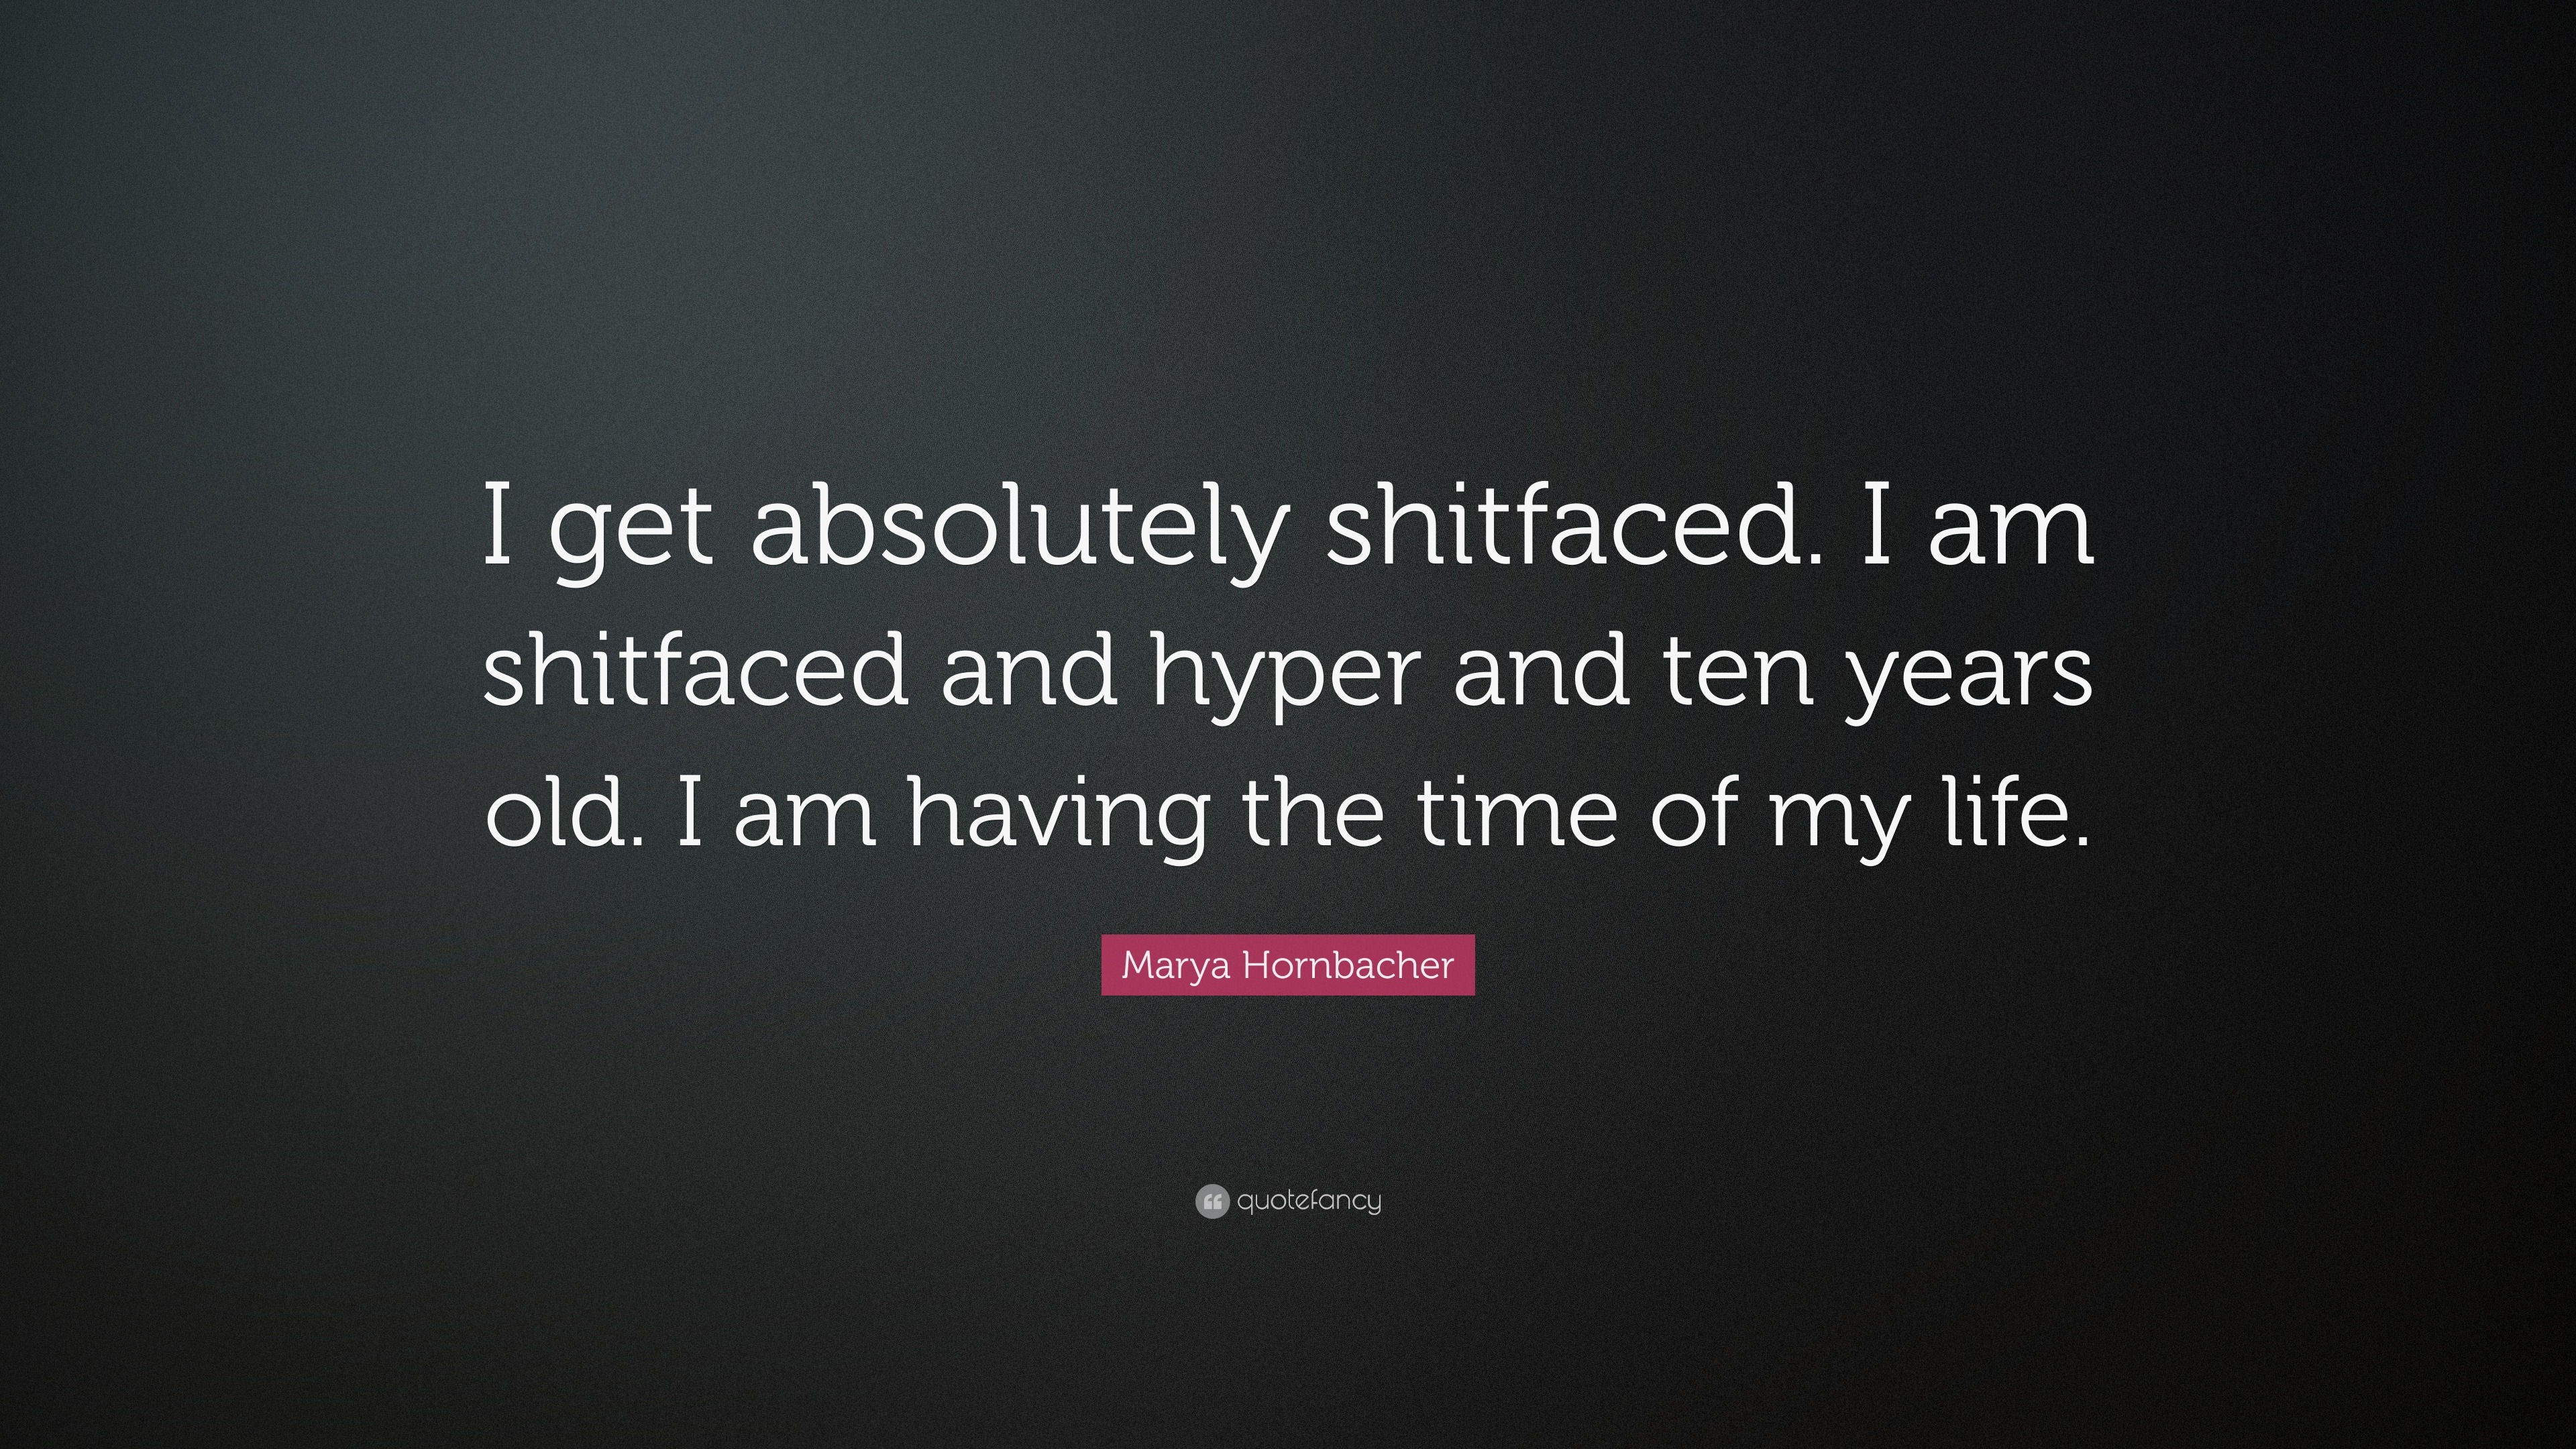 Marya Hornbacher Quote “I absolutely shitfaced I am shitfaced and hyper and